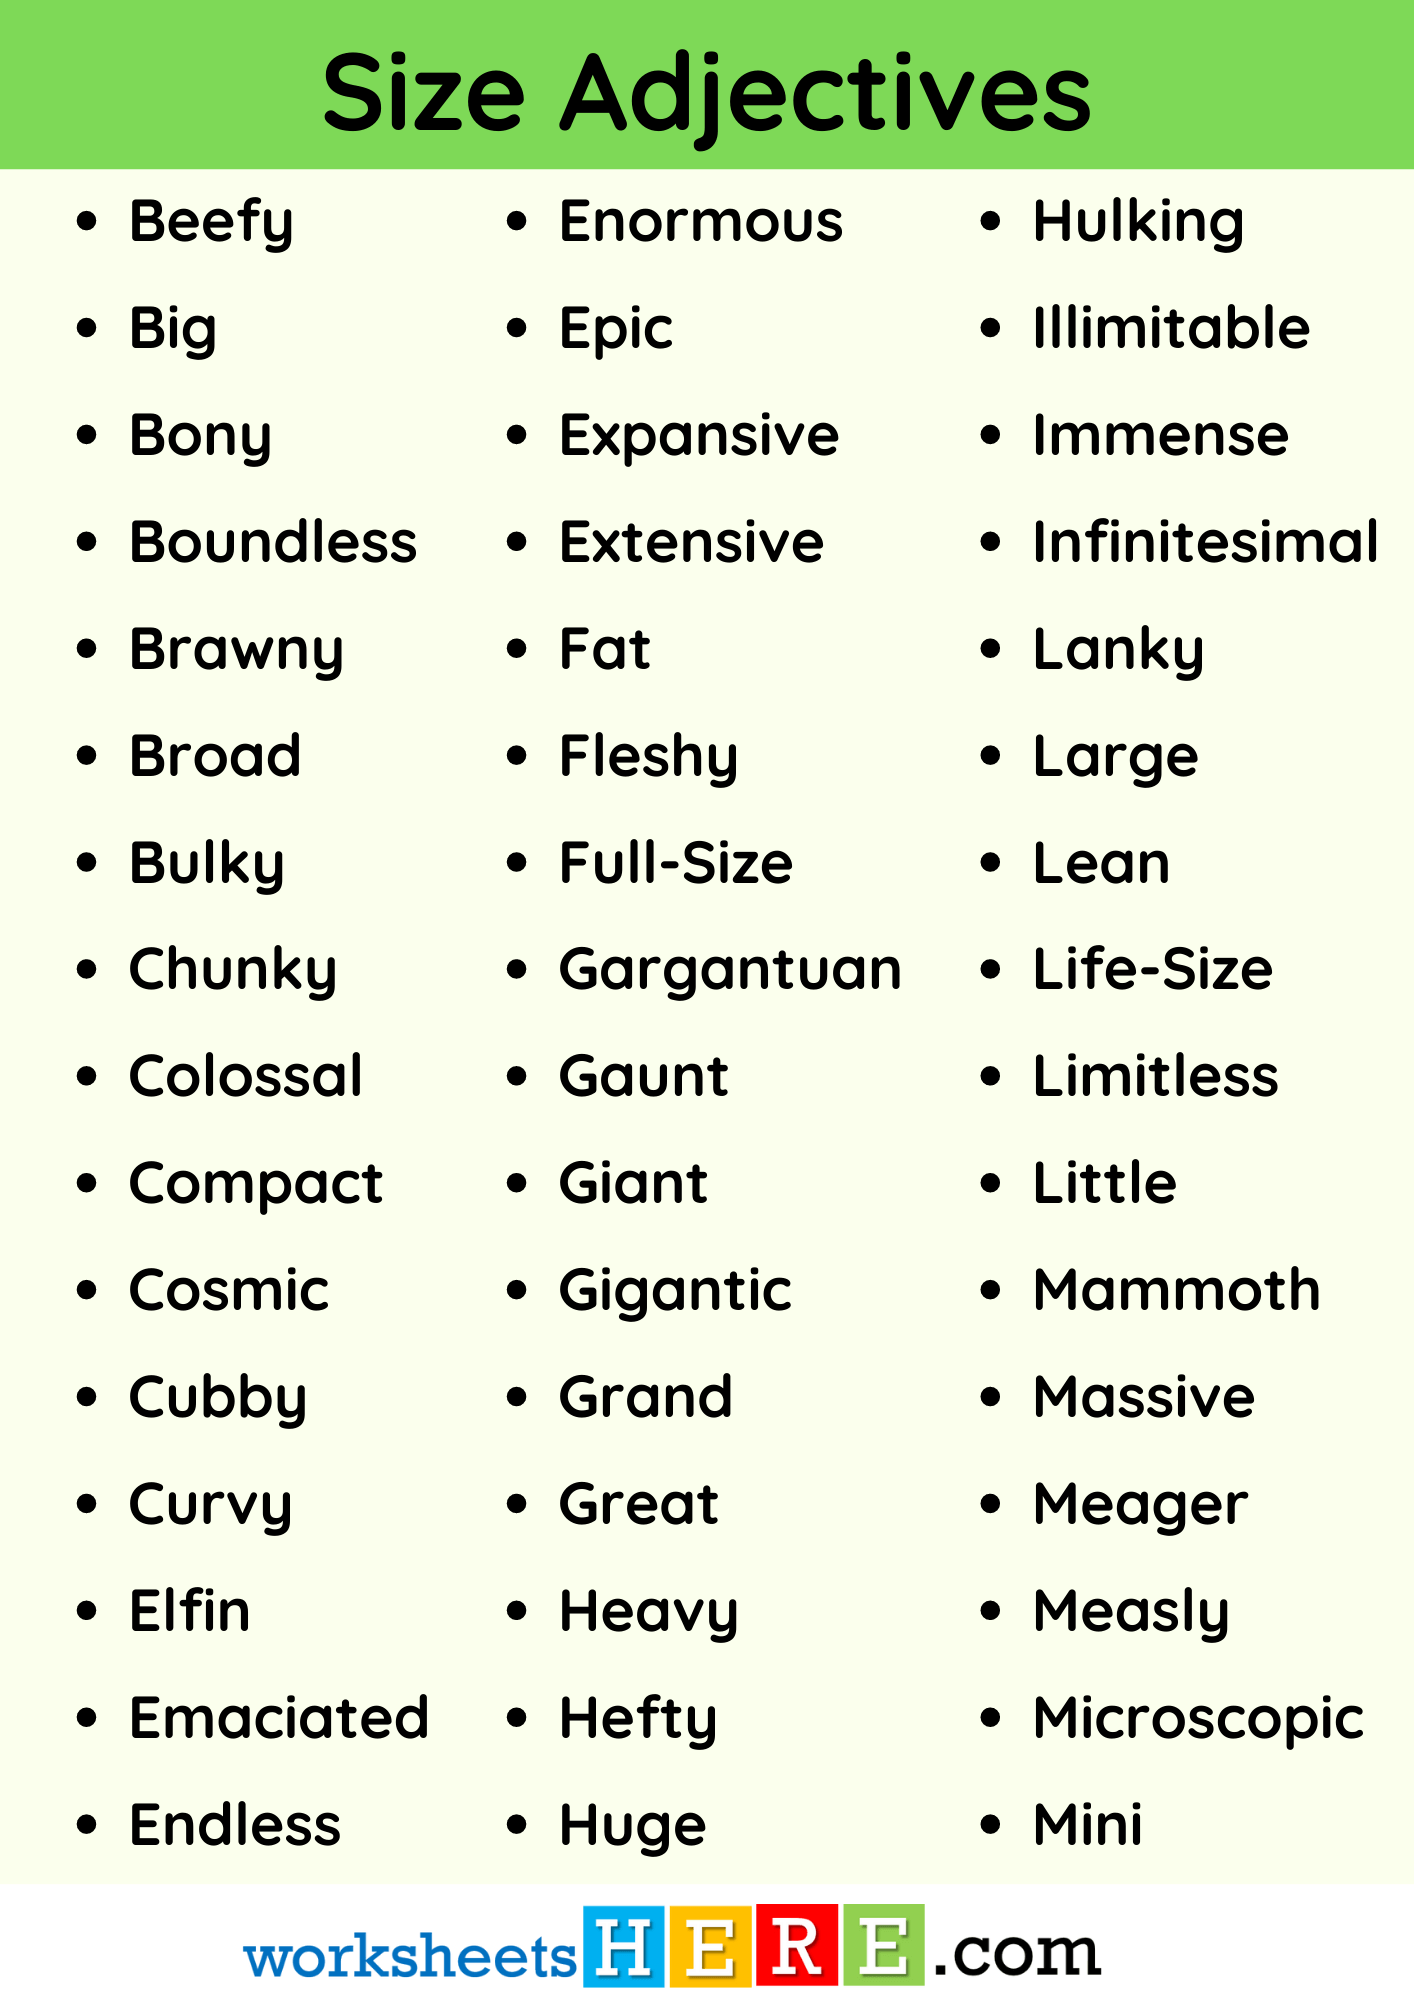 Size Adjectives Vocabulary List PDF Worksheet For Kids and Students